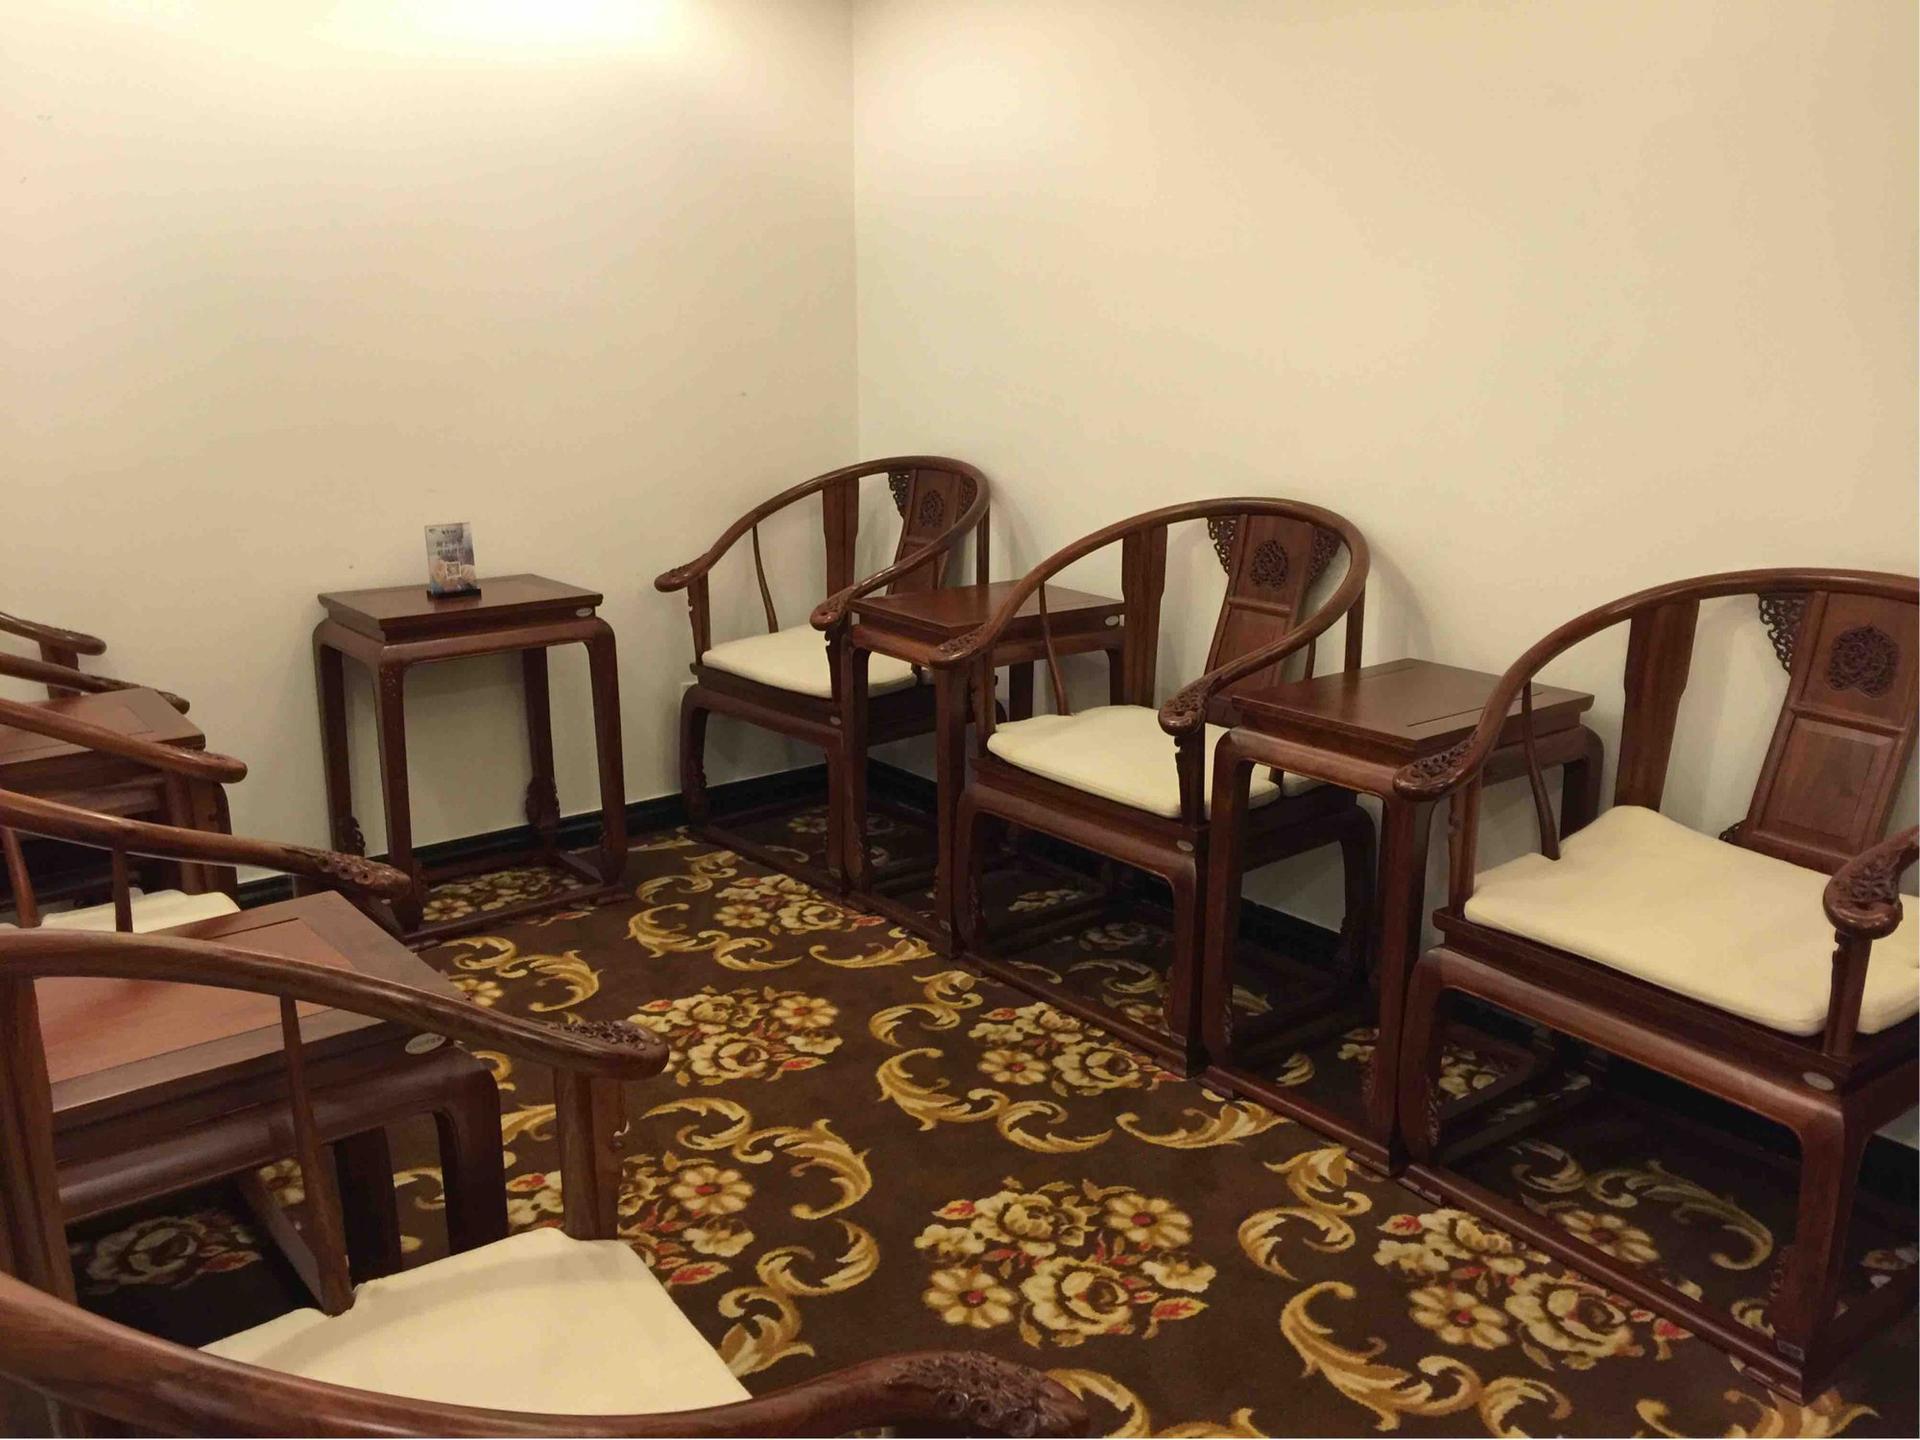 Baiyun Airport First Class Lounge (Closed For Renovation) image 8 of 11